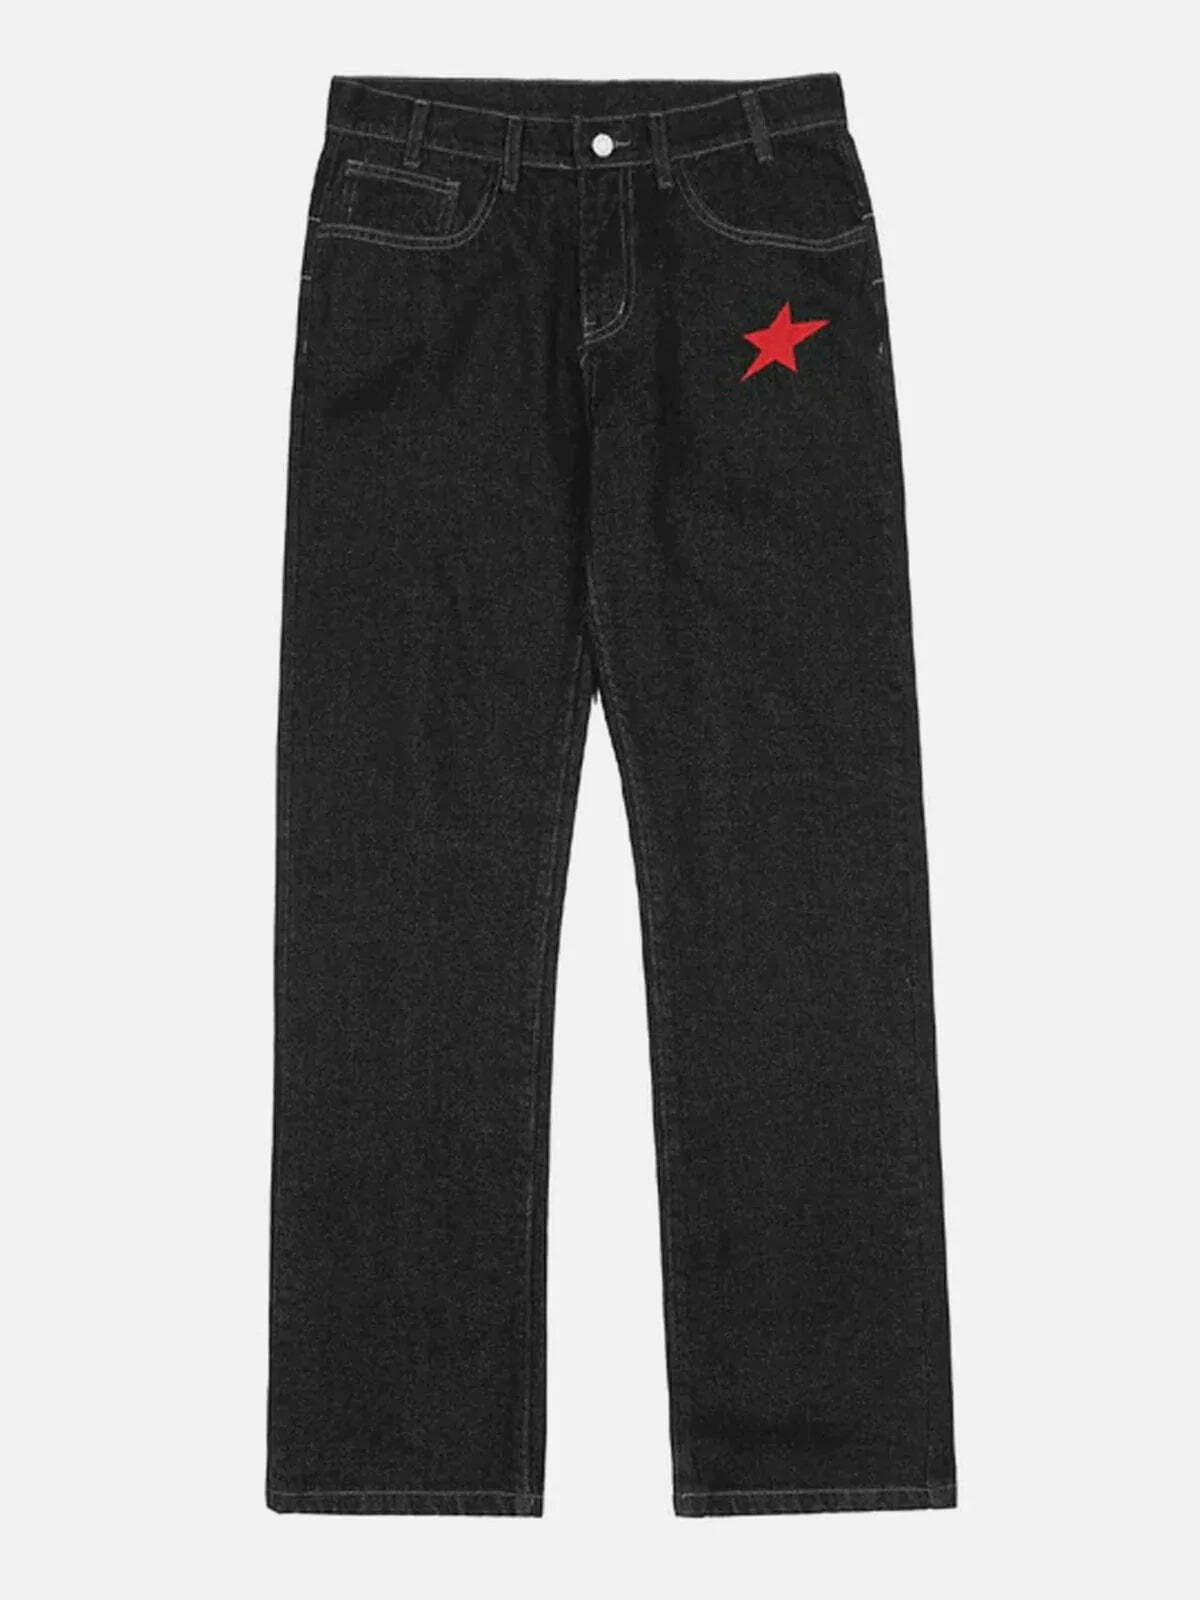 embroidered star letter jeans edgy & retro streetwear 7220